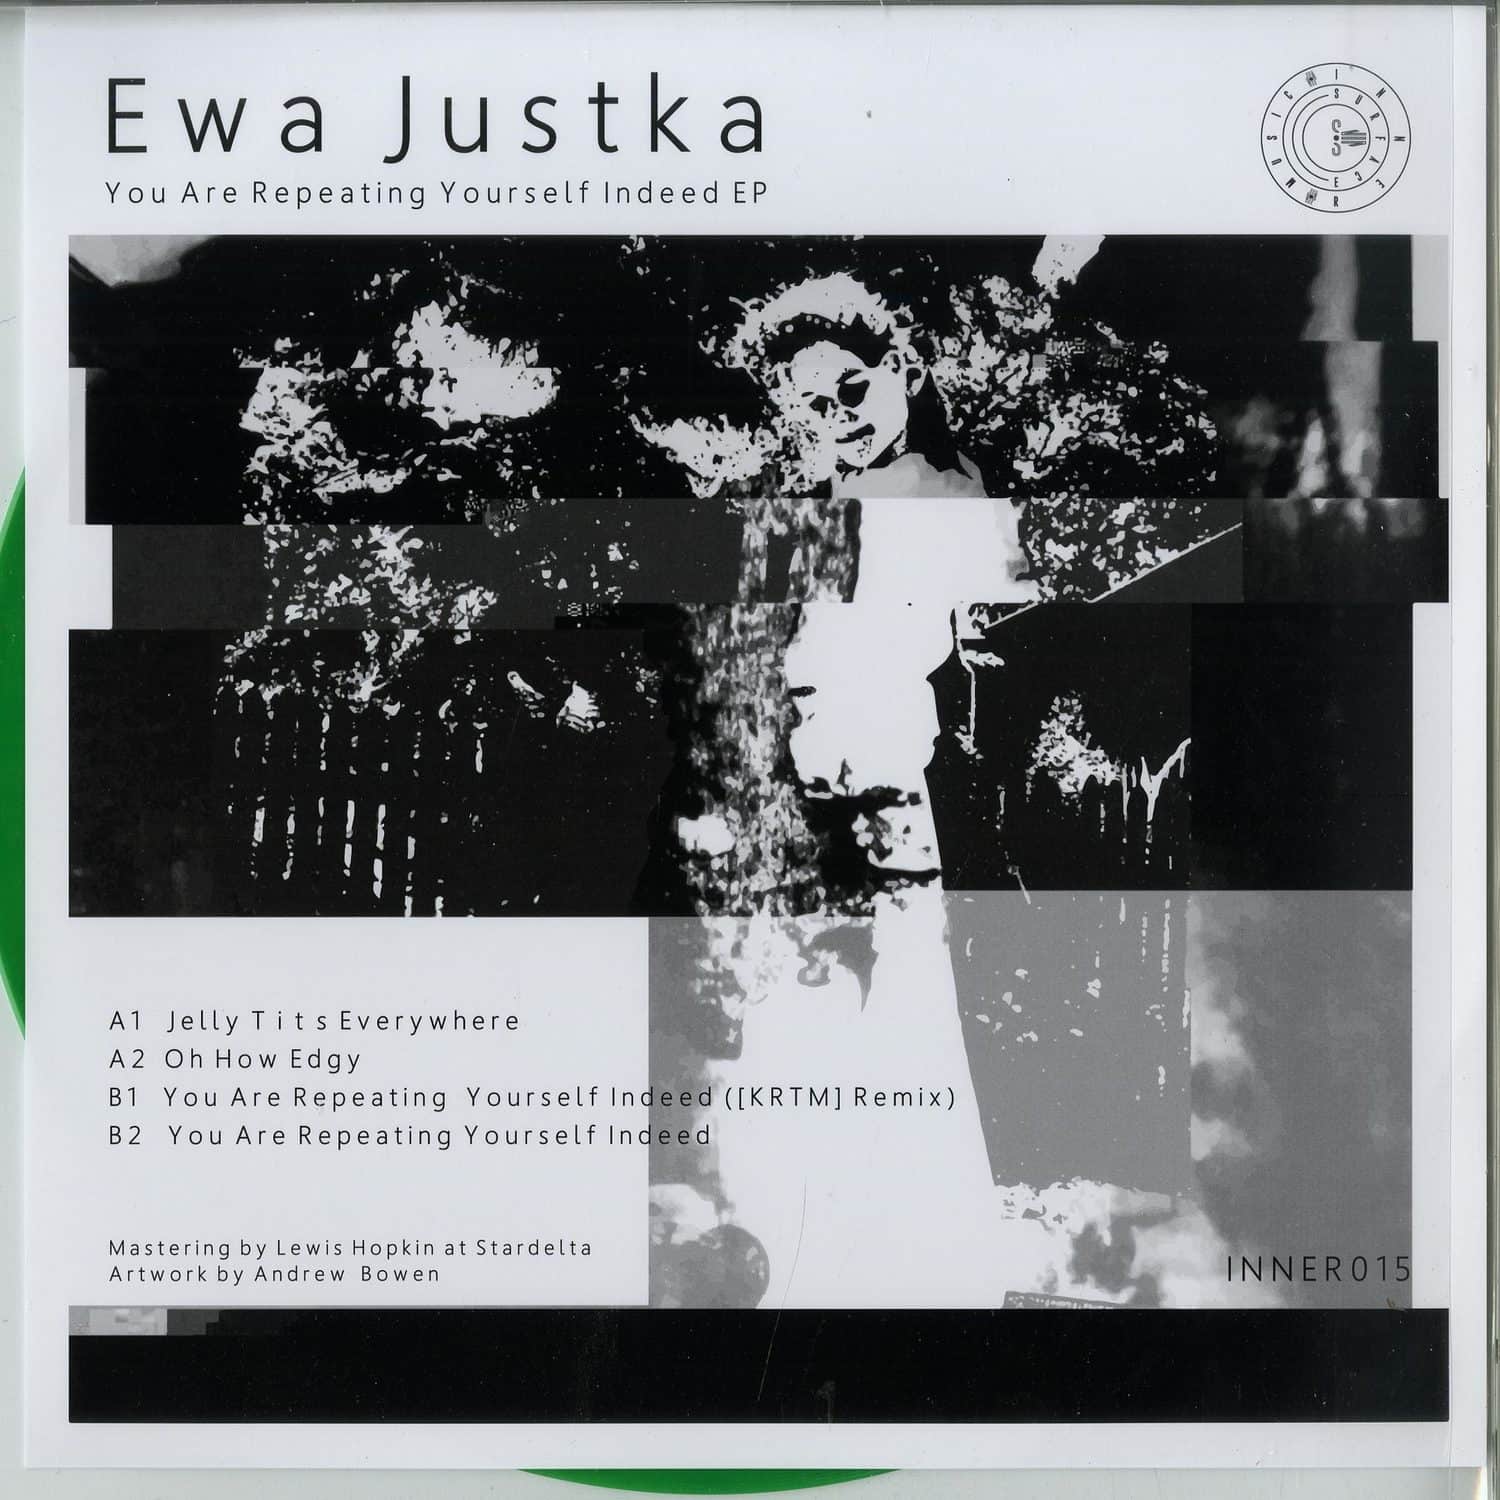 Ewa Justka - YOU ARE REPEATING YOURSELF INDEED EP 